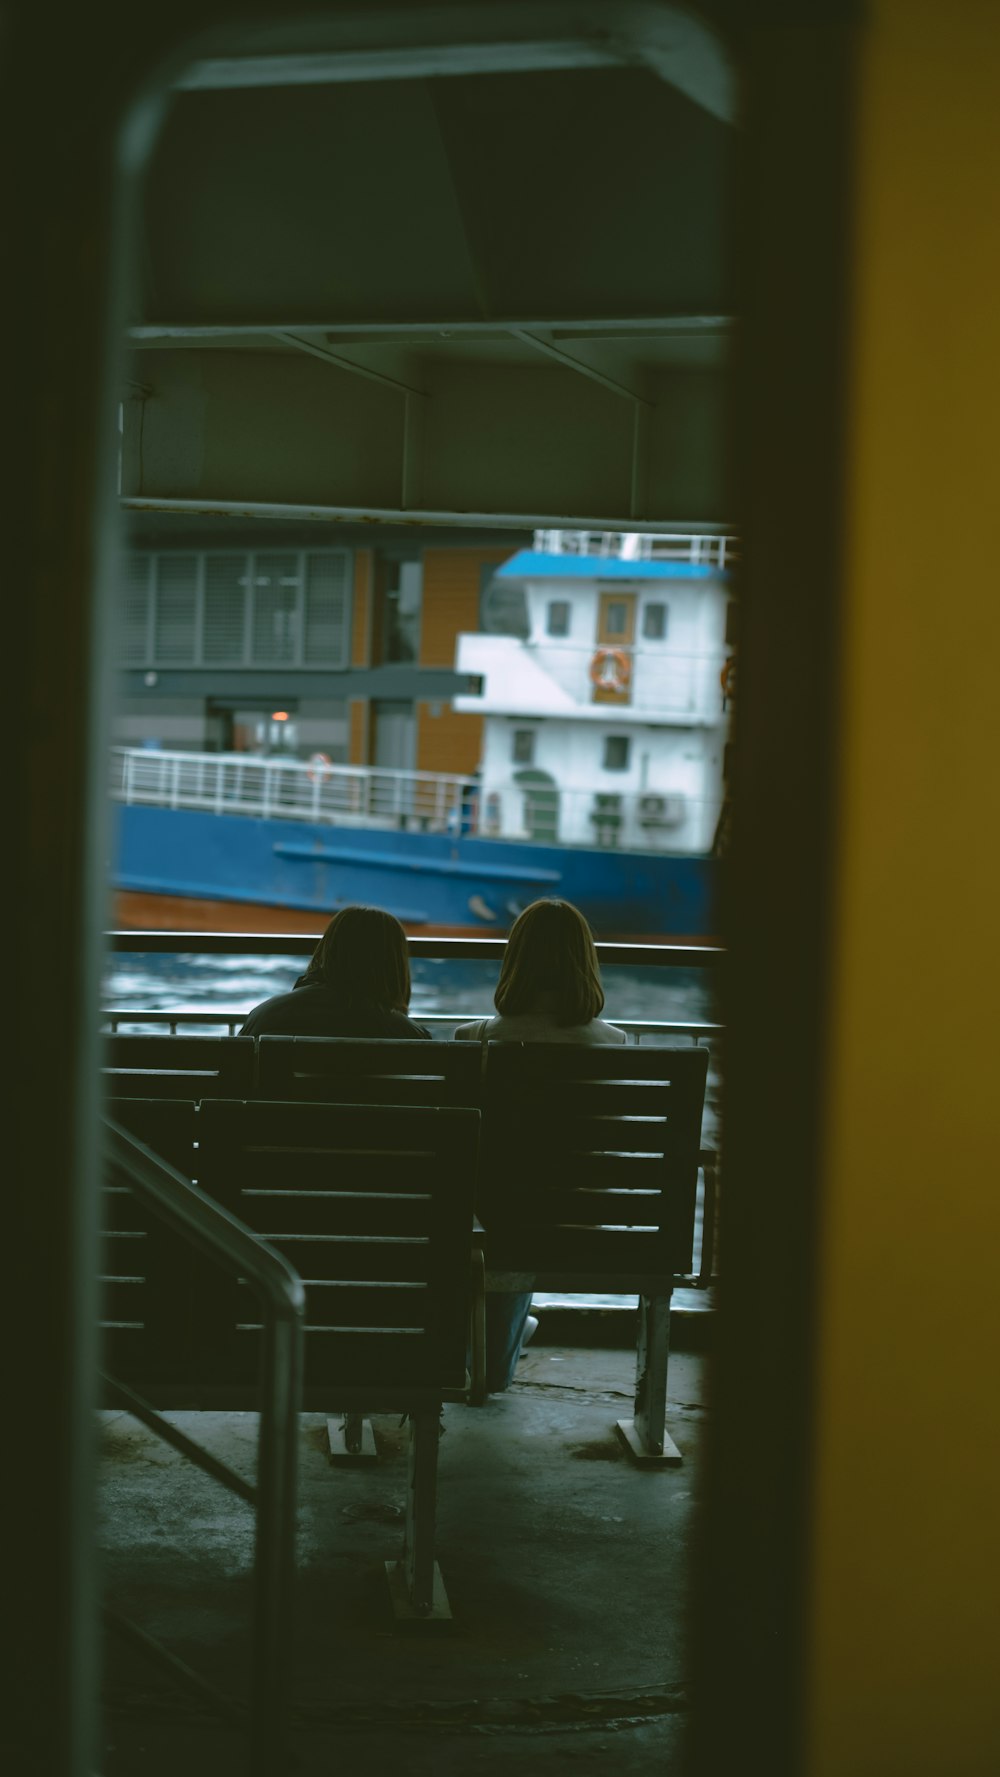 two people sitting on a bench in a train station